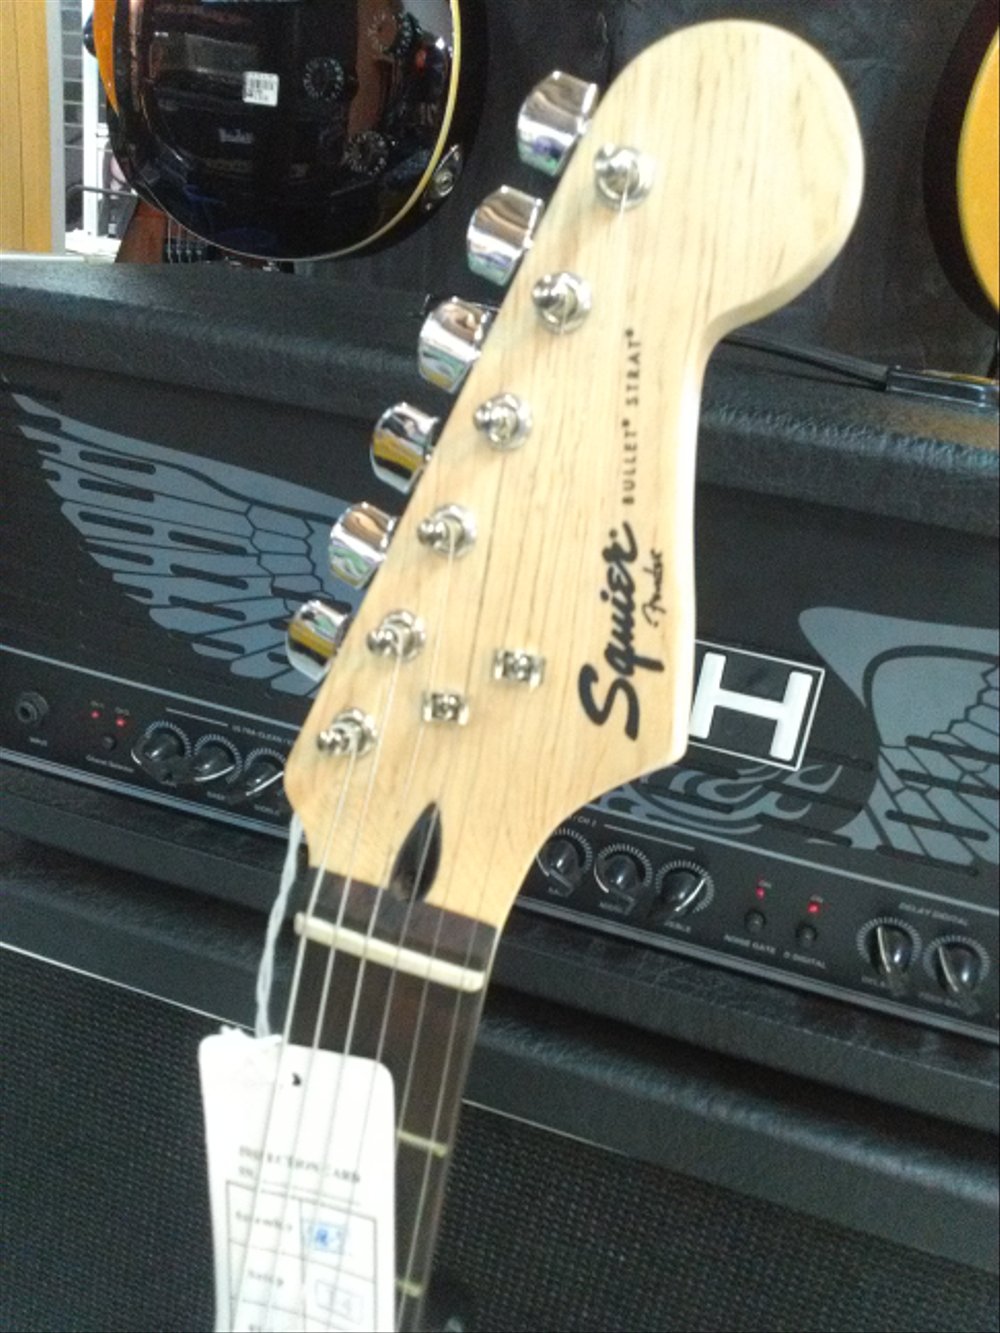 Fender squier serial number indonesia execution video